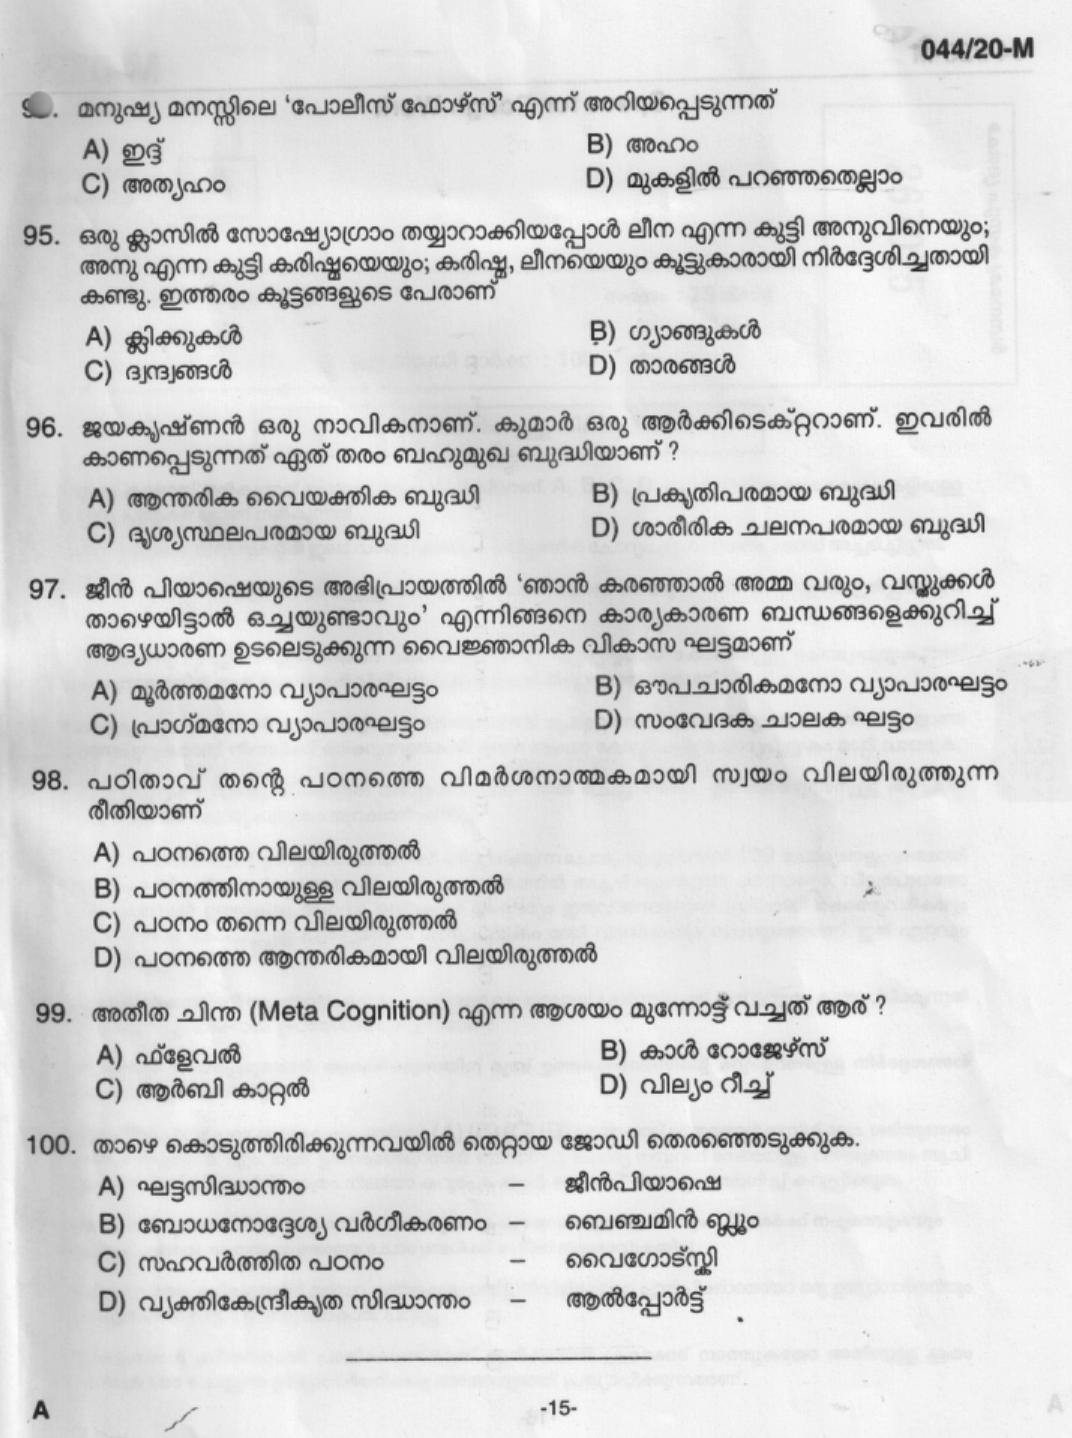 UP School Teacher Question paper with Answer Key 44/20